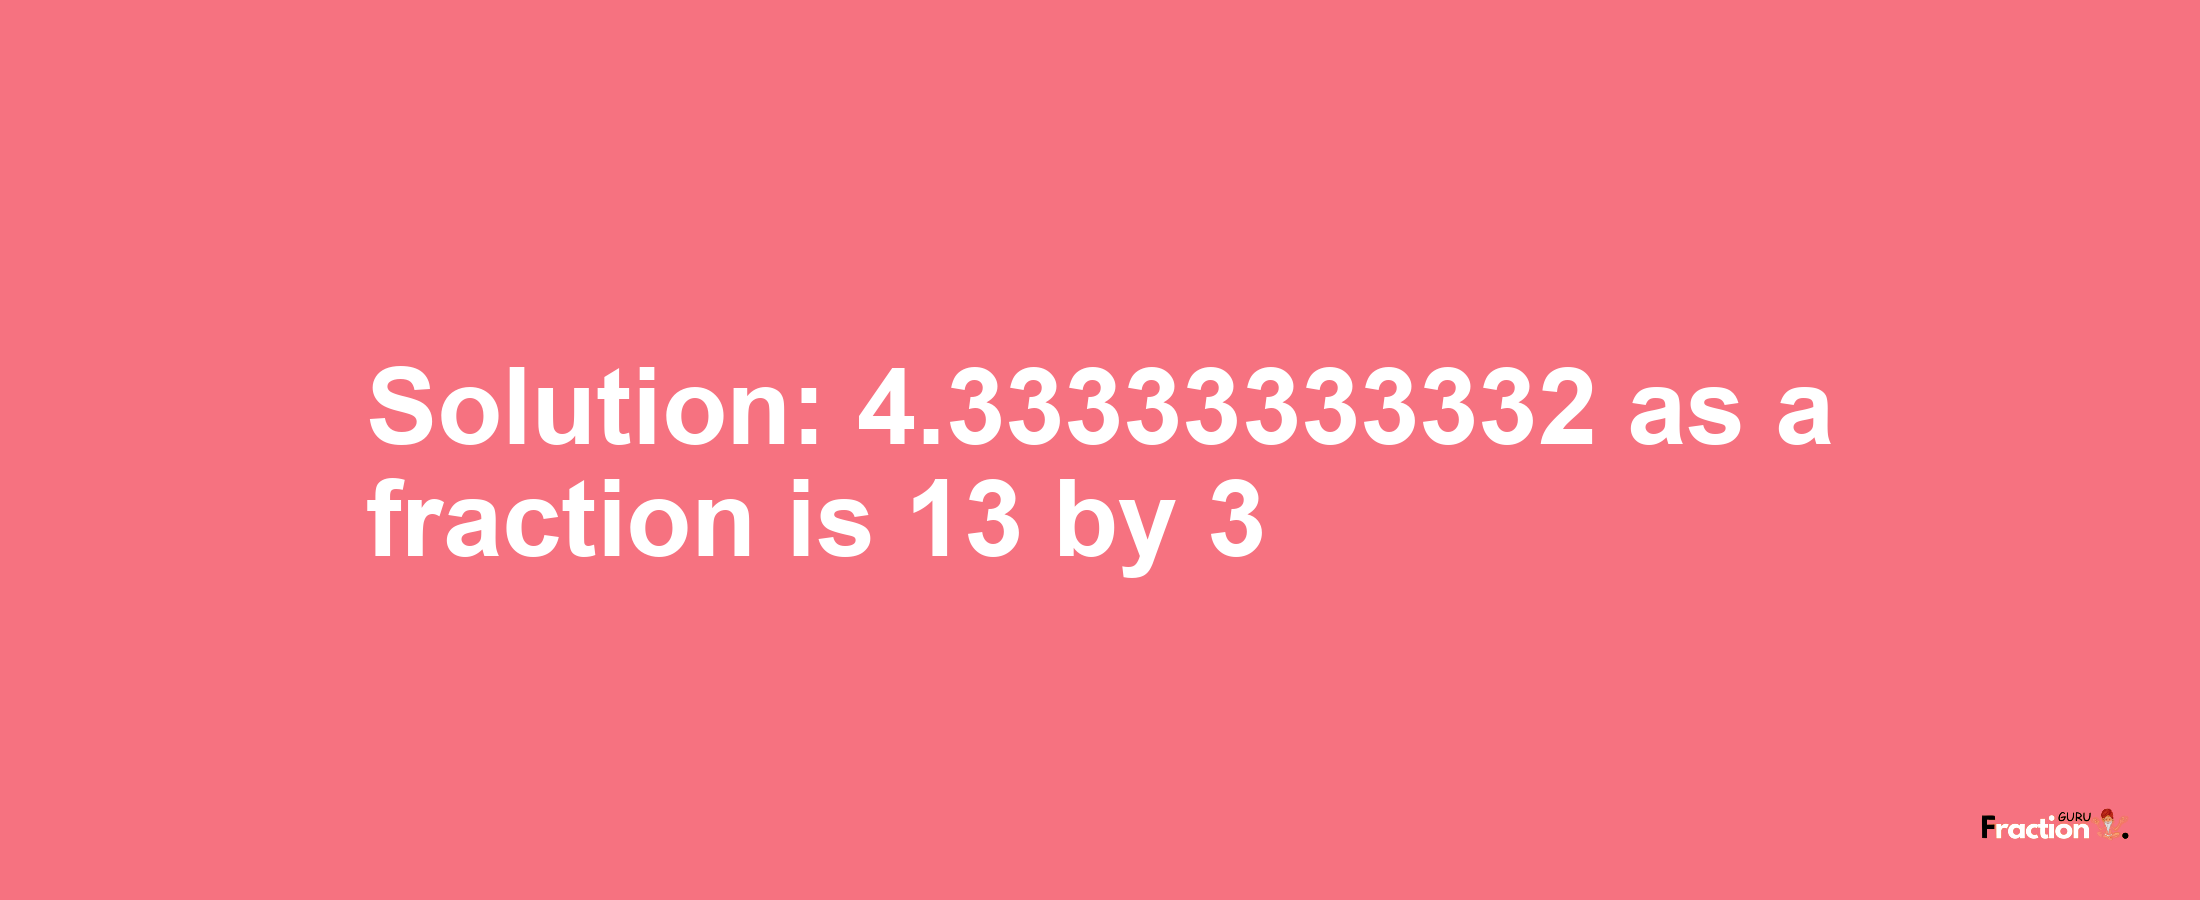 Solution:4.33333333332 as a fraction is 13/3